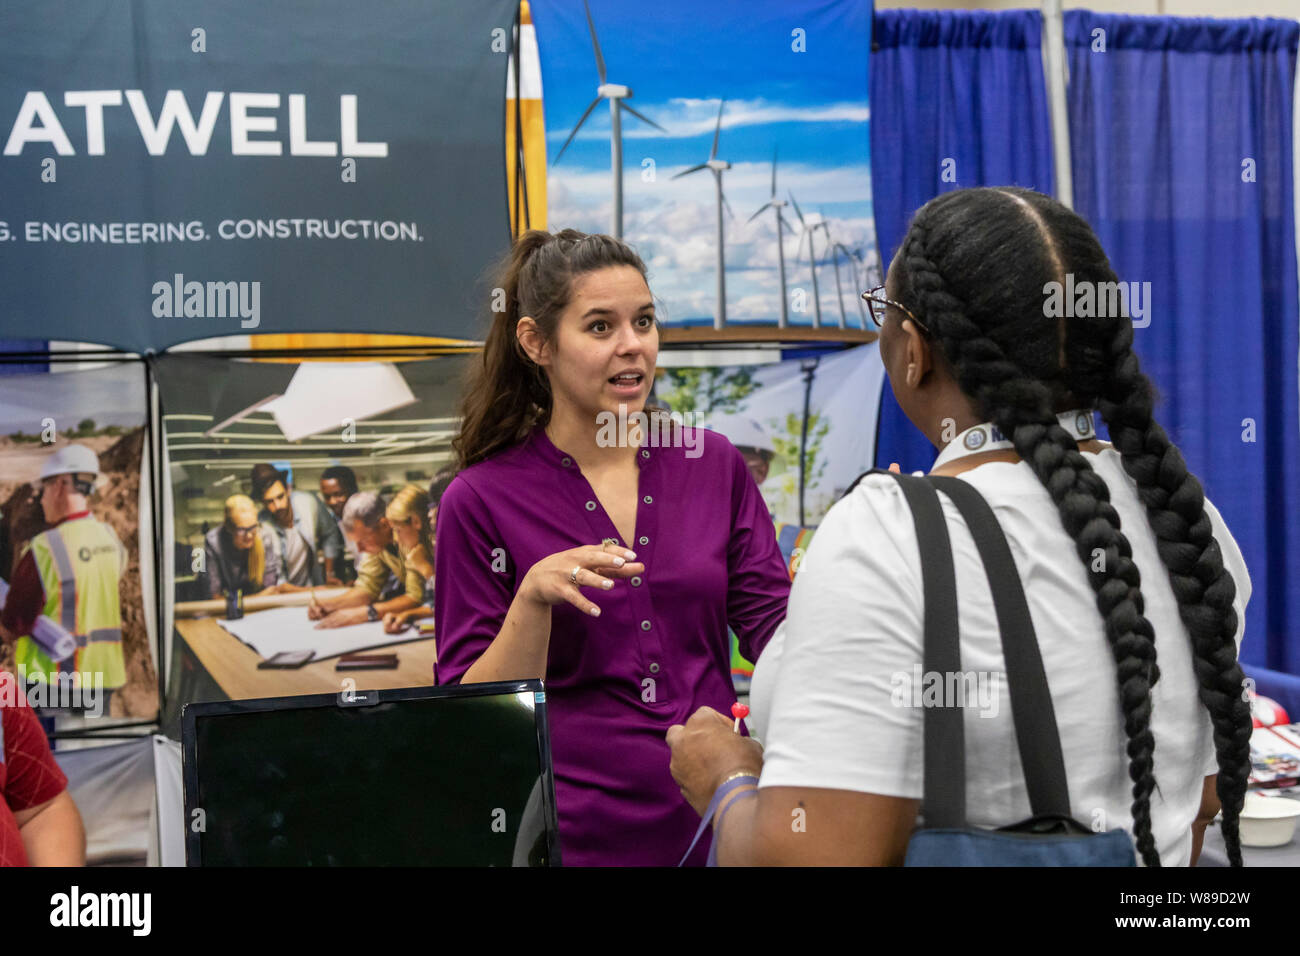 Detroit, Michigan - Atwell, a company that among other things builds wind turbines, recruits at a job fair during the annual convention of the Nationa Stock Photo